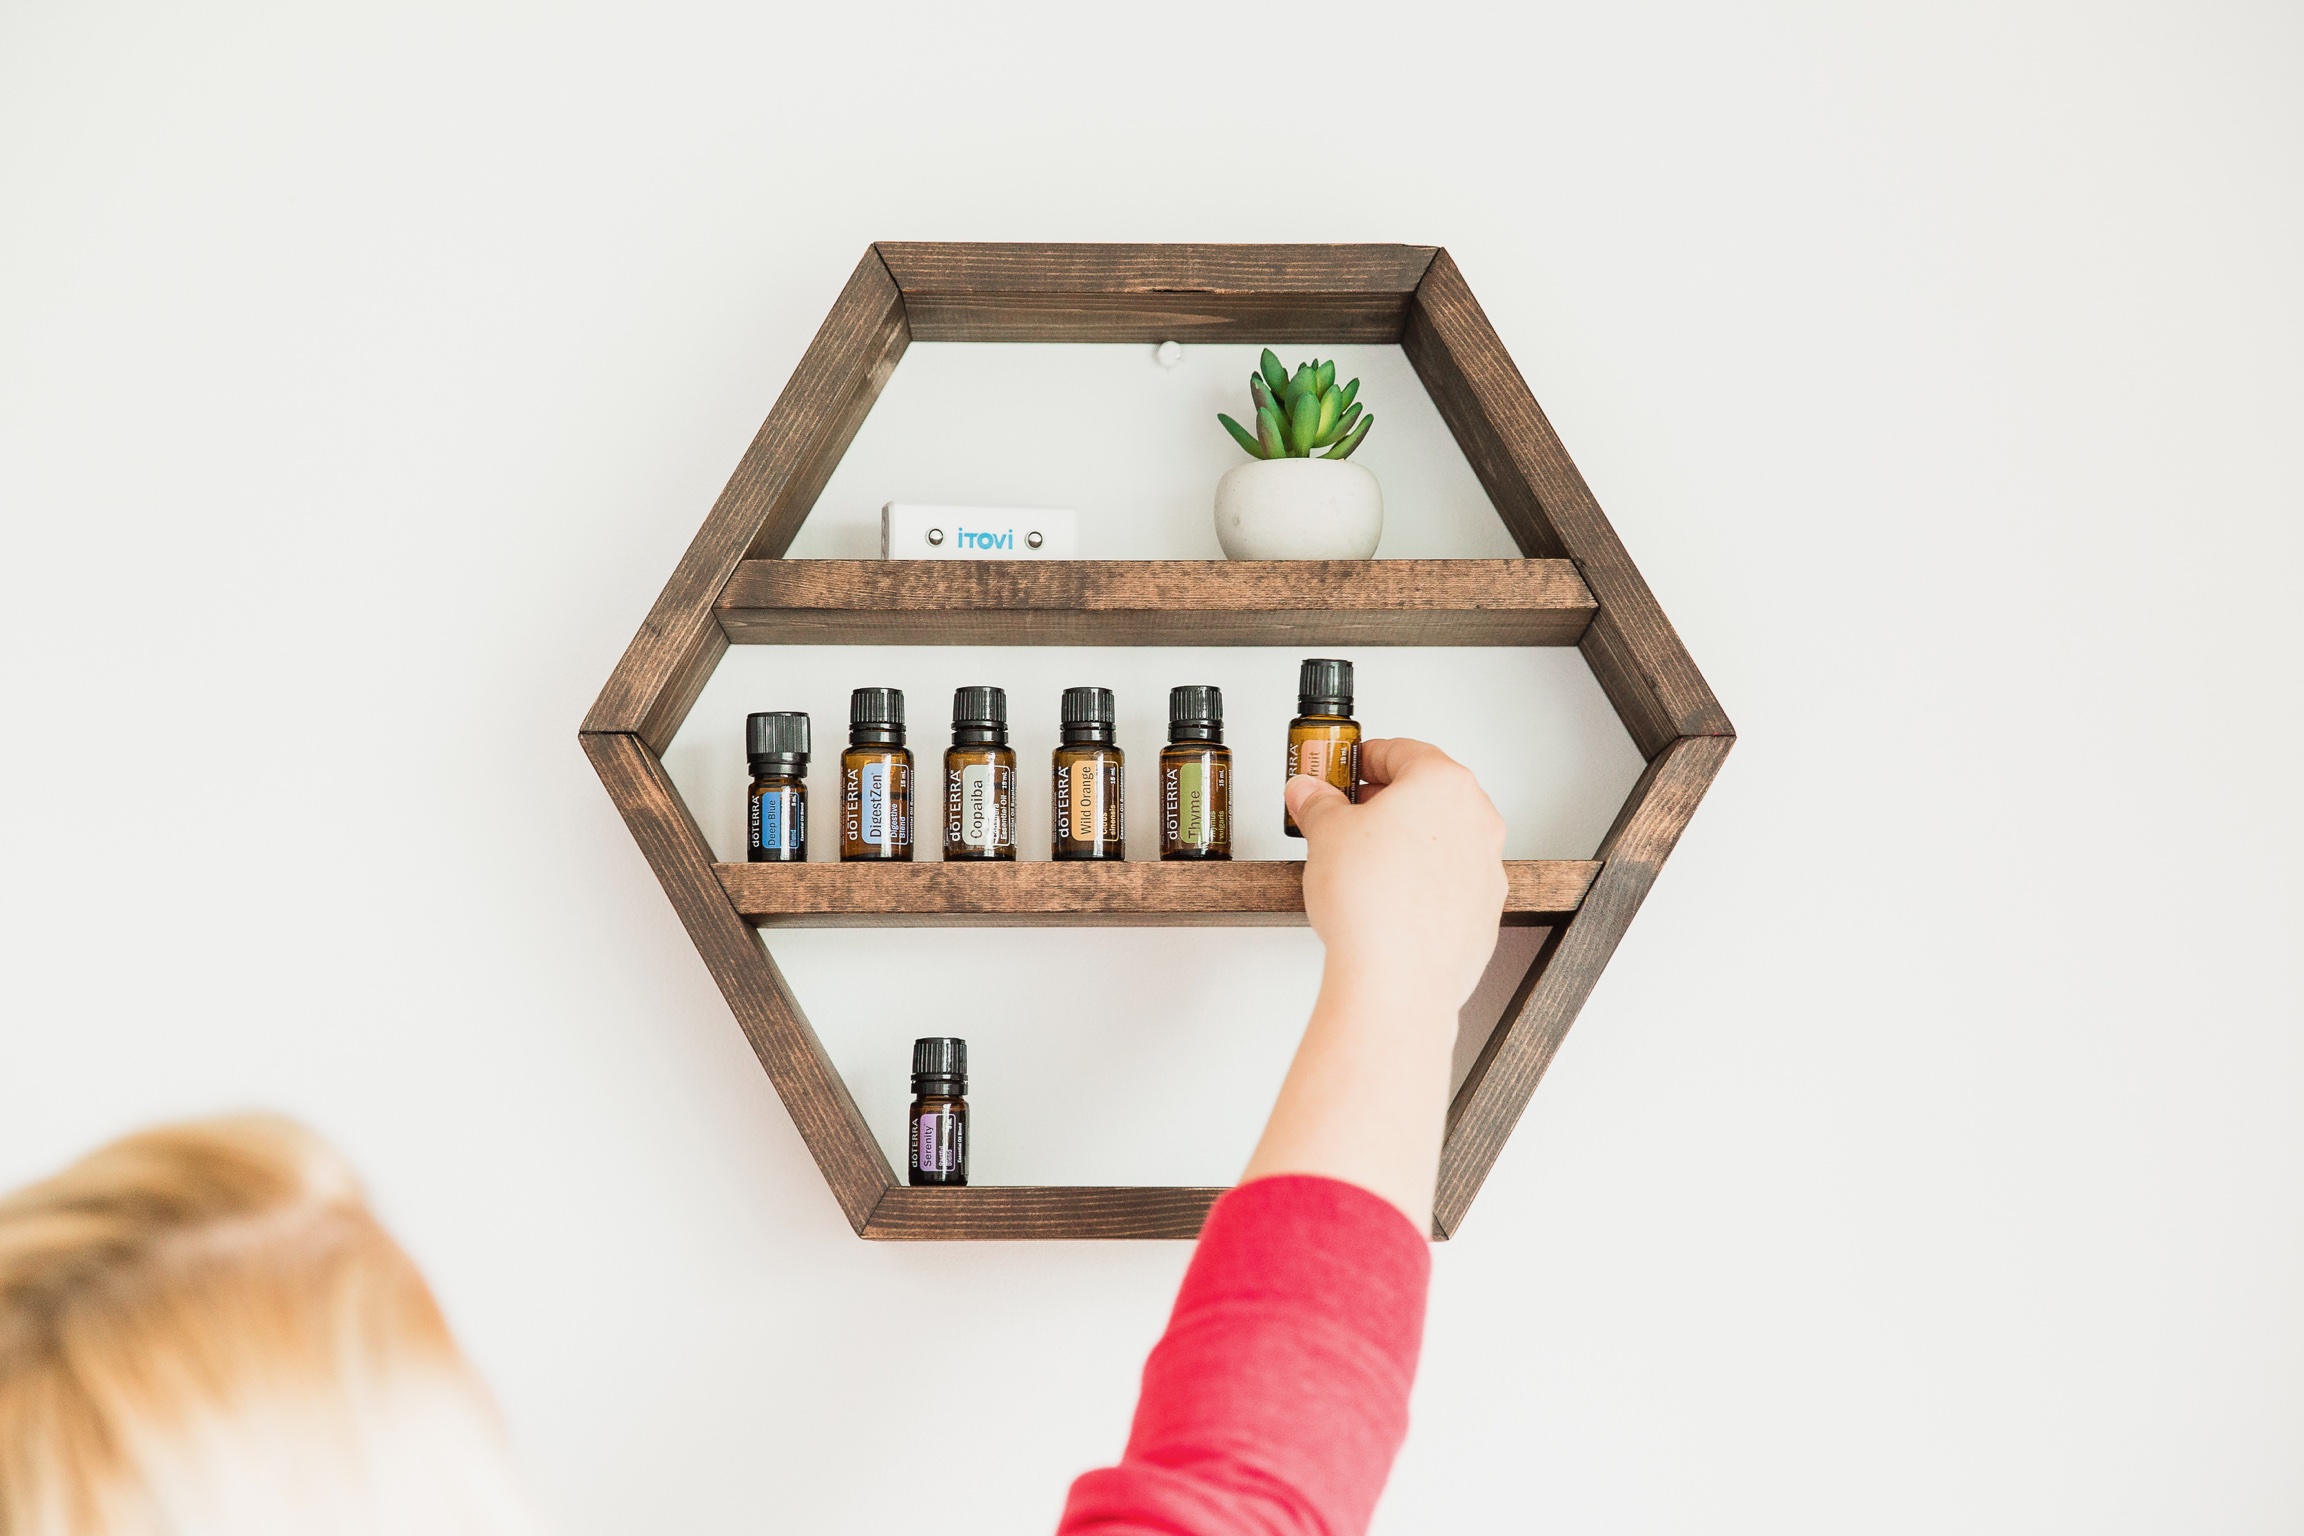 How to Store Essential Oils: Do's & Don'ts for Storing Oils